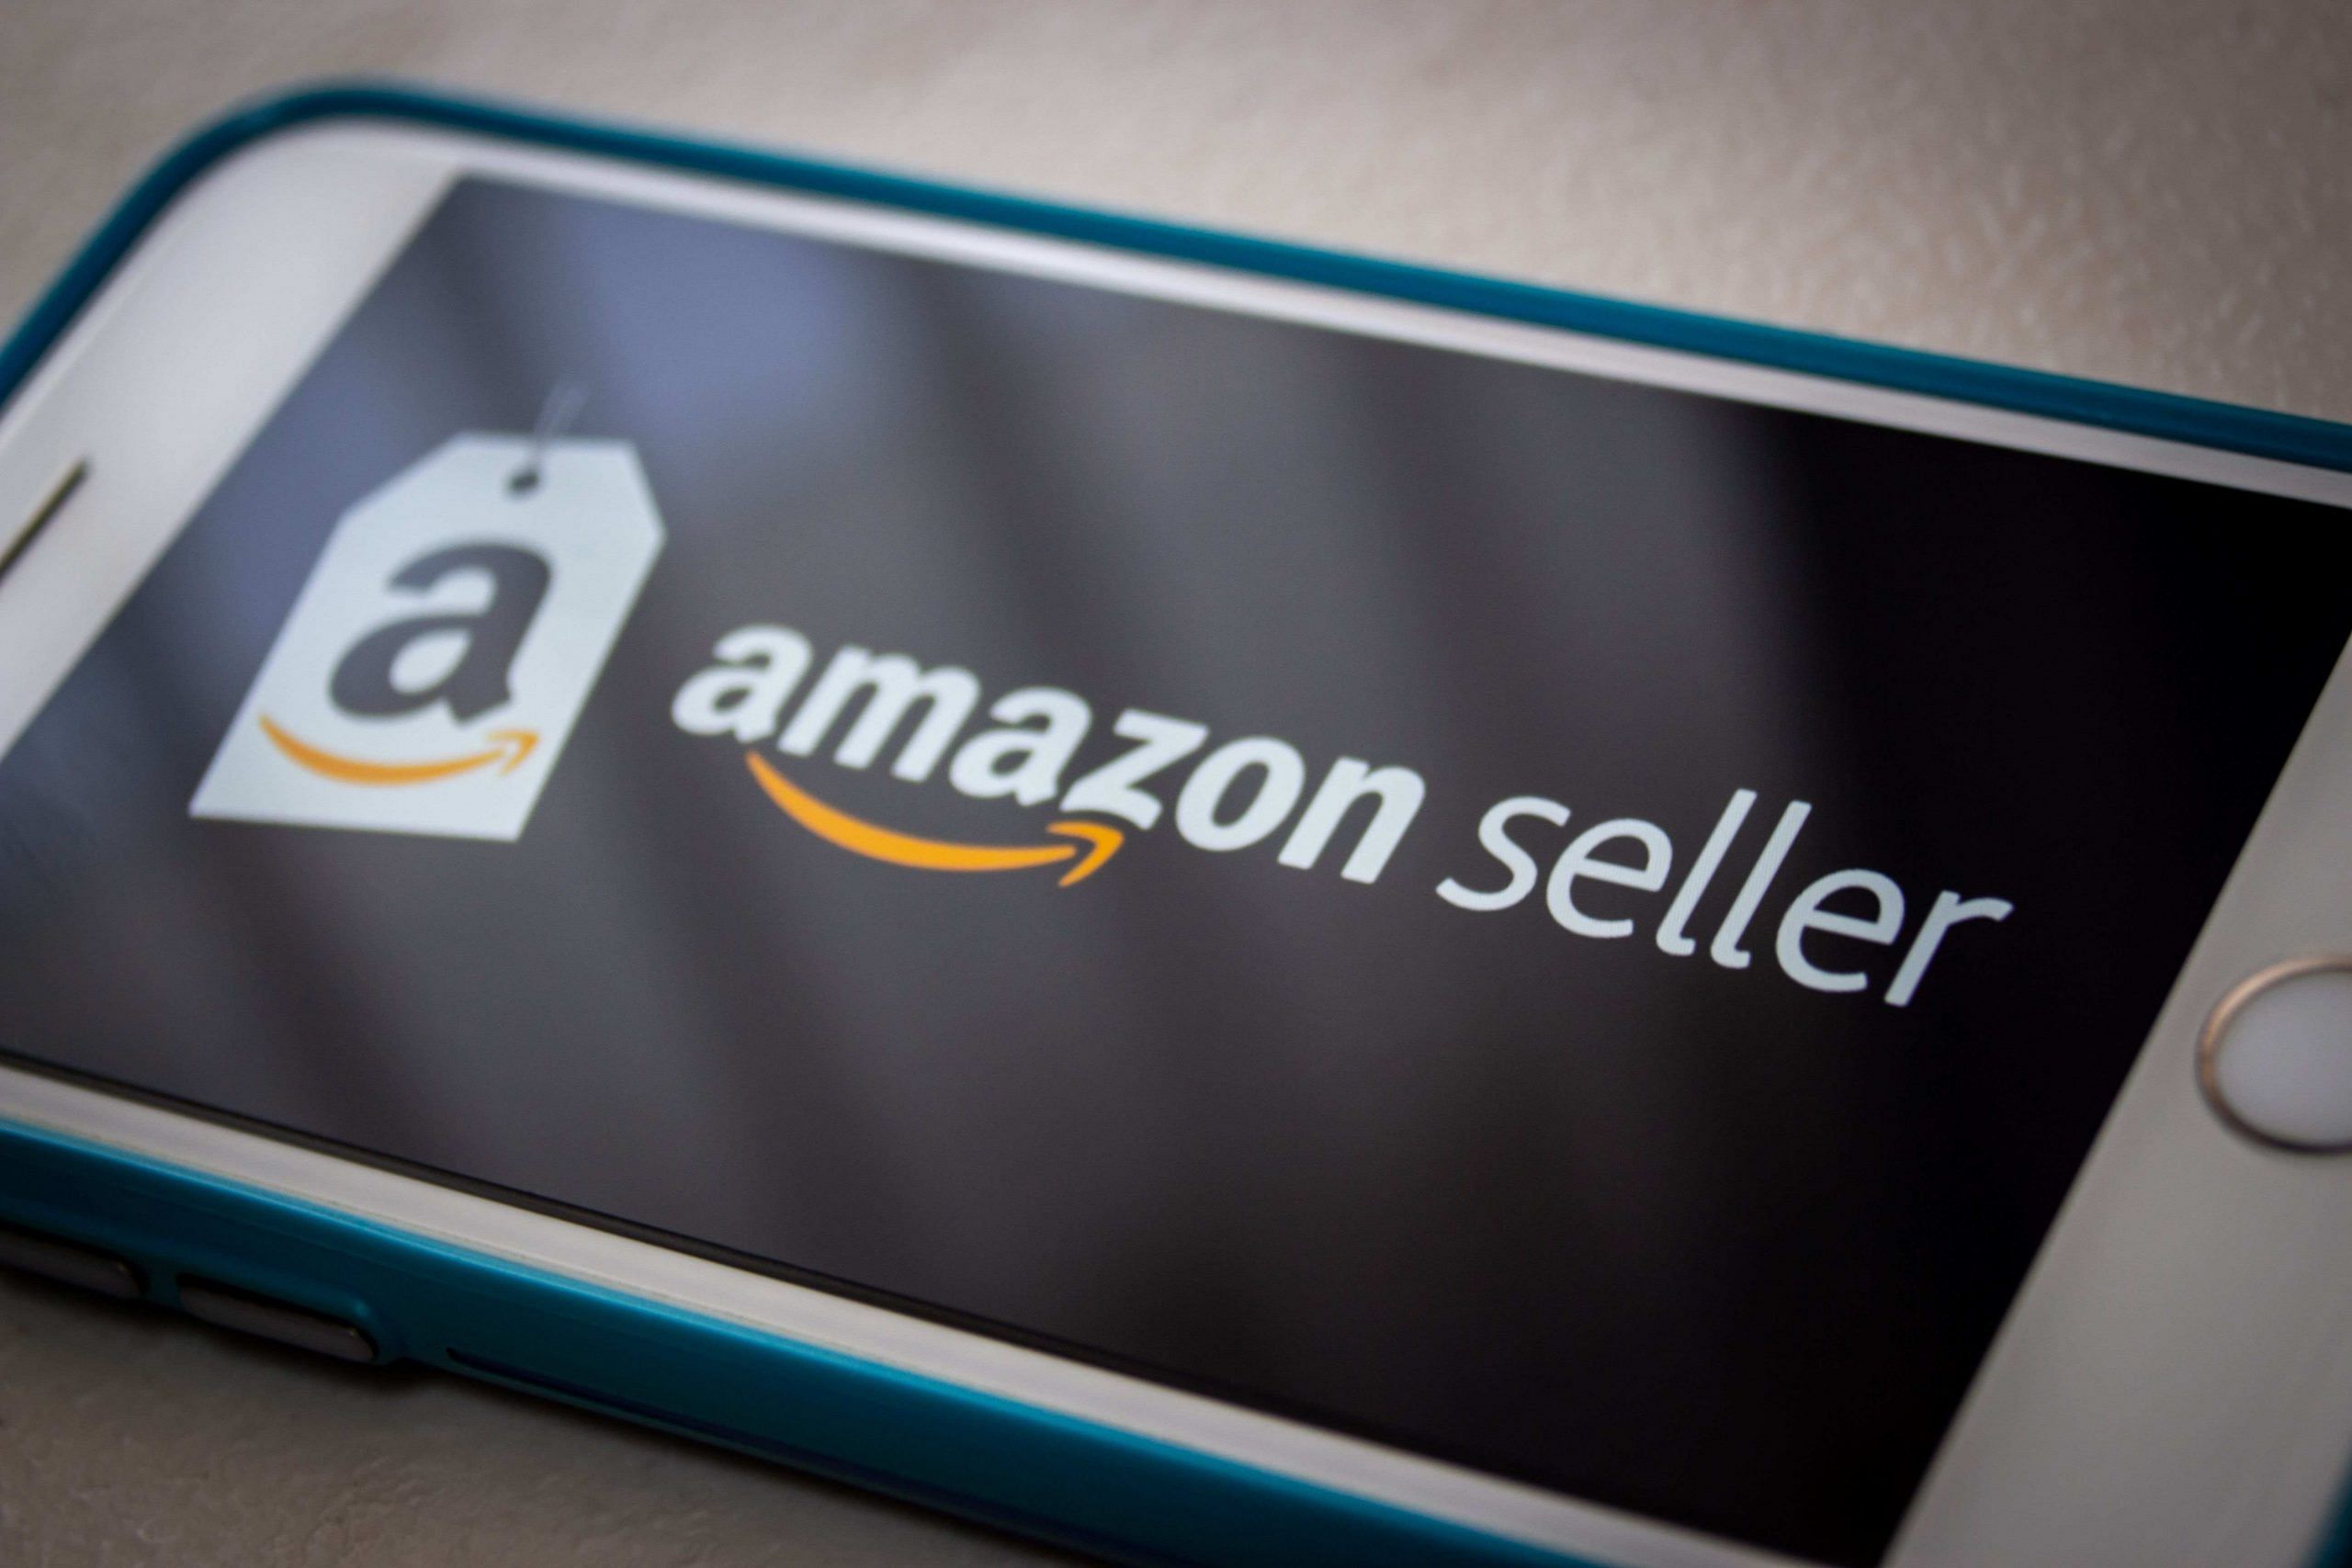 The amazon seller central guide will be newbie’s orientation tool for Amazon that aims to reduce risk and undue effort